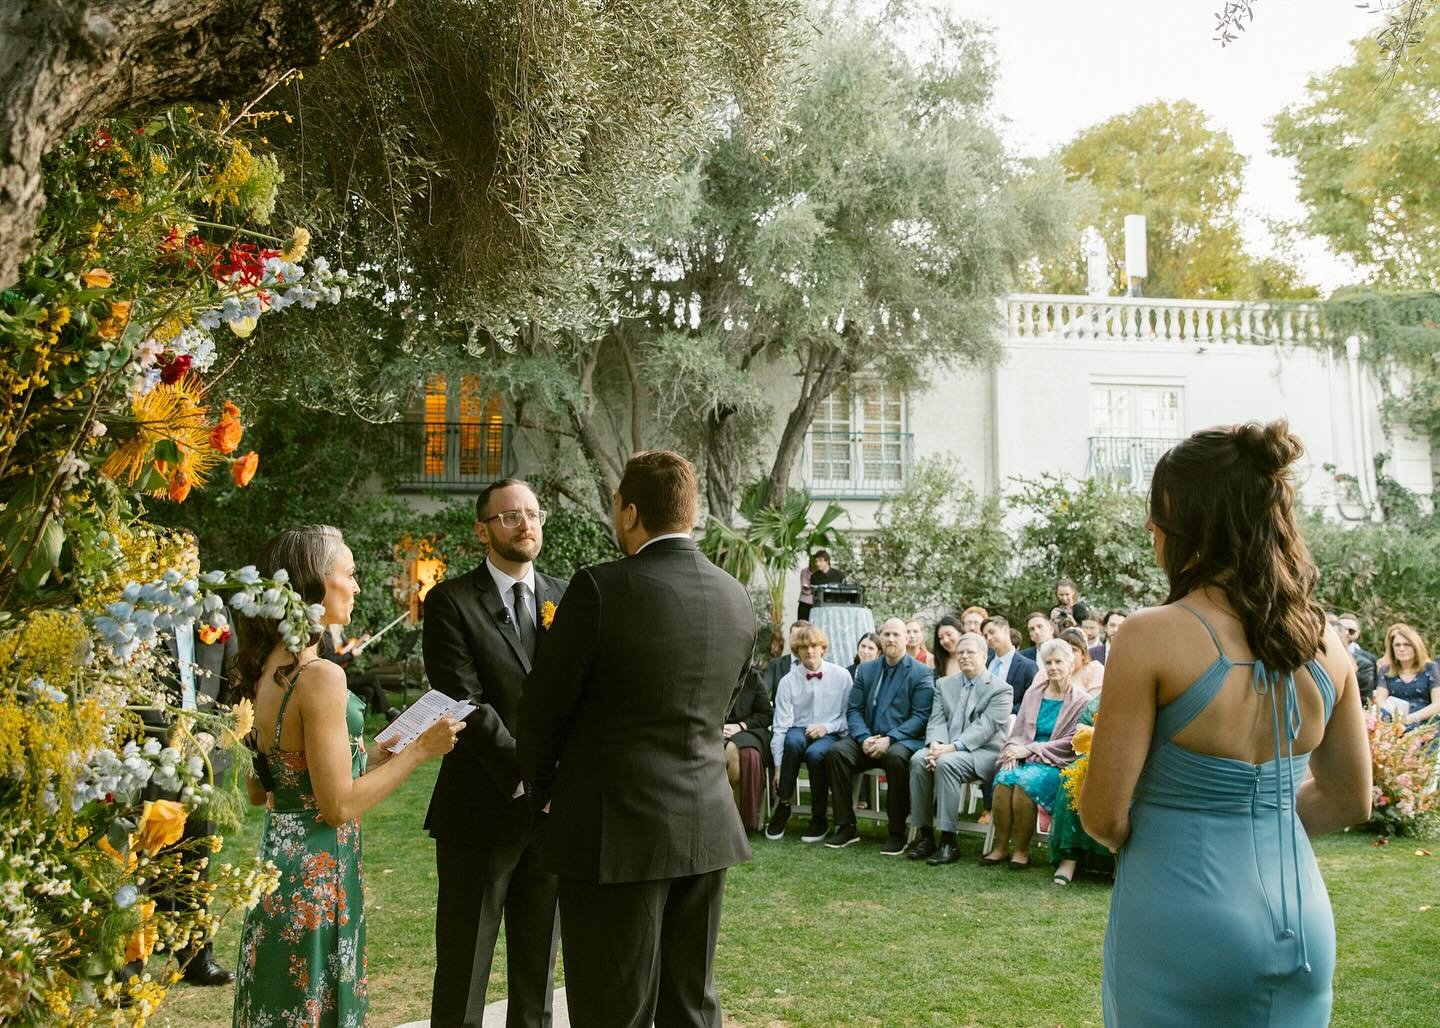 The Palm Springs winter golden hour + classically Old Hollywood @parkerpalmsprings architecture = THE SHOT🎬📽️🎞️

@parkerpalmsprings 
@jemerlingweddings 
@sharkpigweddings 
@cobralily 
@jennifermariefoxdesign 
@dartcollective 
@overtherainbowdesser